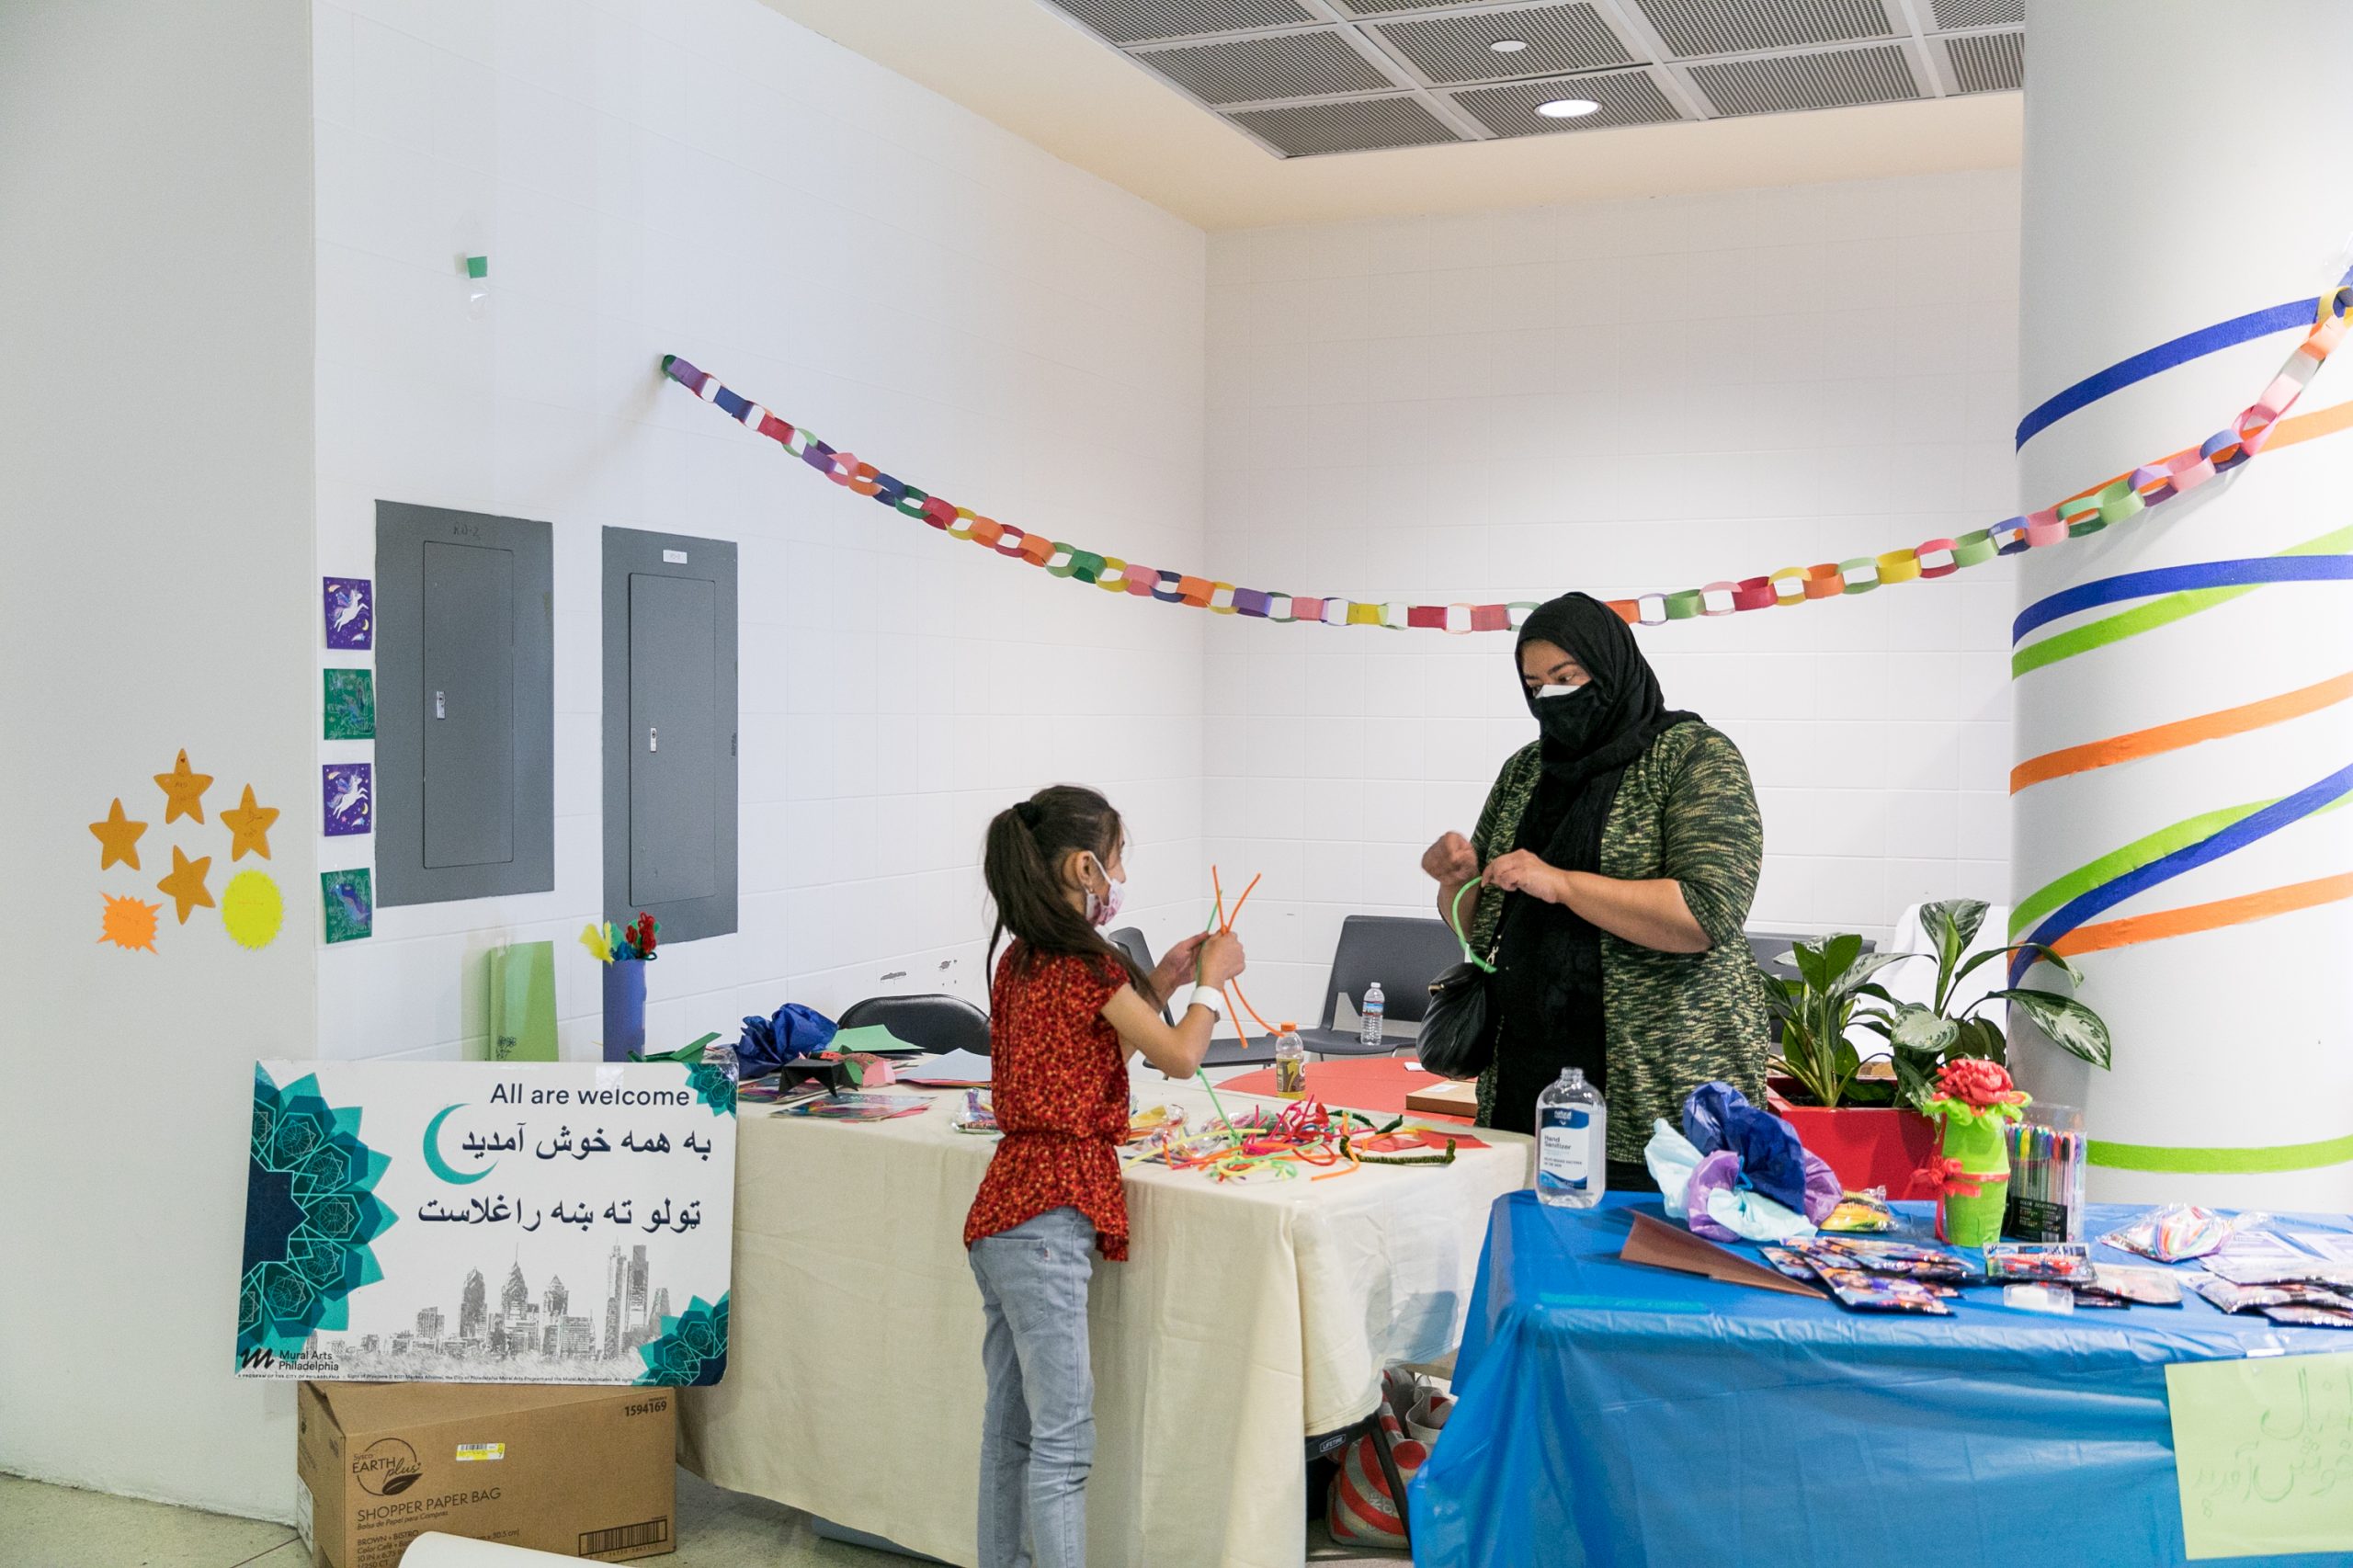 A Porch Light staff member behind a table at the airport helps a young girl create crafts. The table is brightly decorated with streamers in different colors and nearby a sign reads 